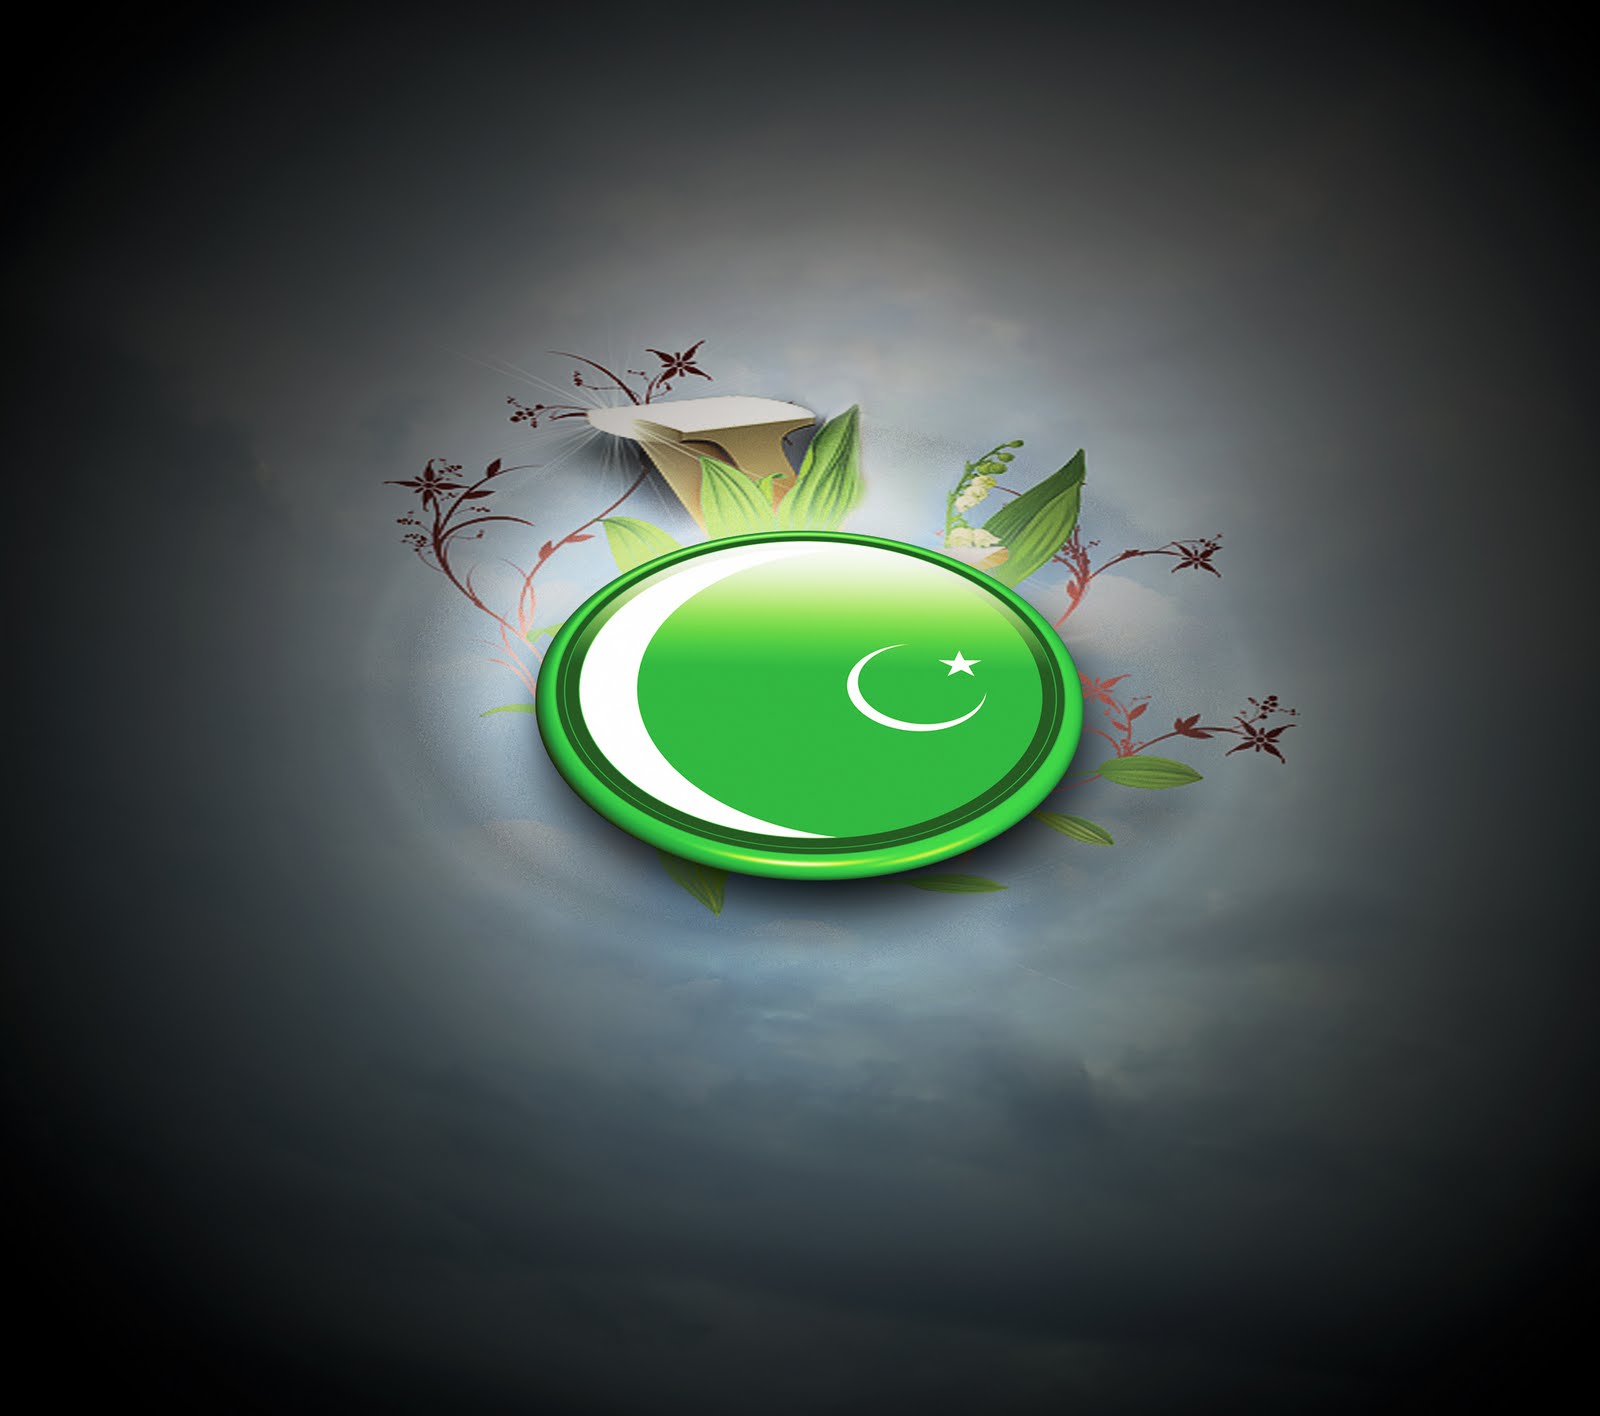 Related To Top HD Puter And Mobile Pakistani Flags Wallpaper